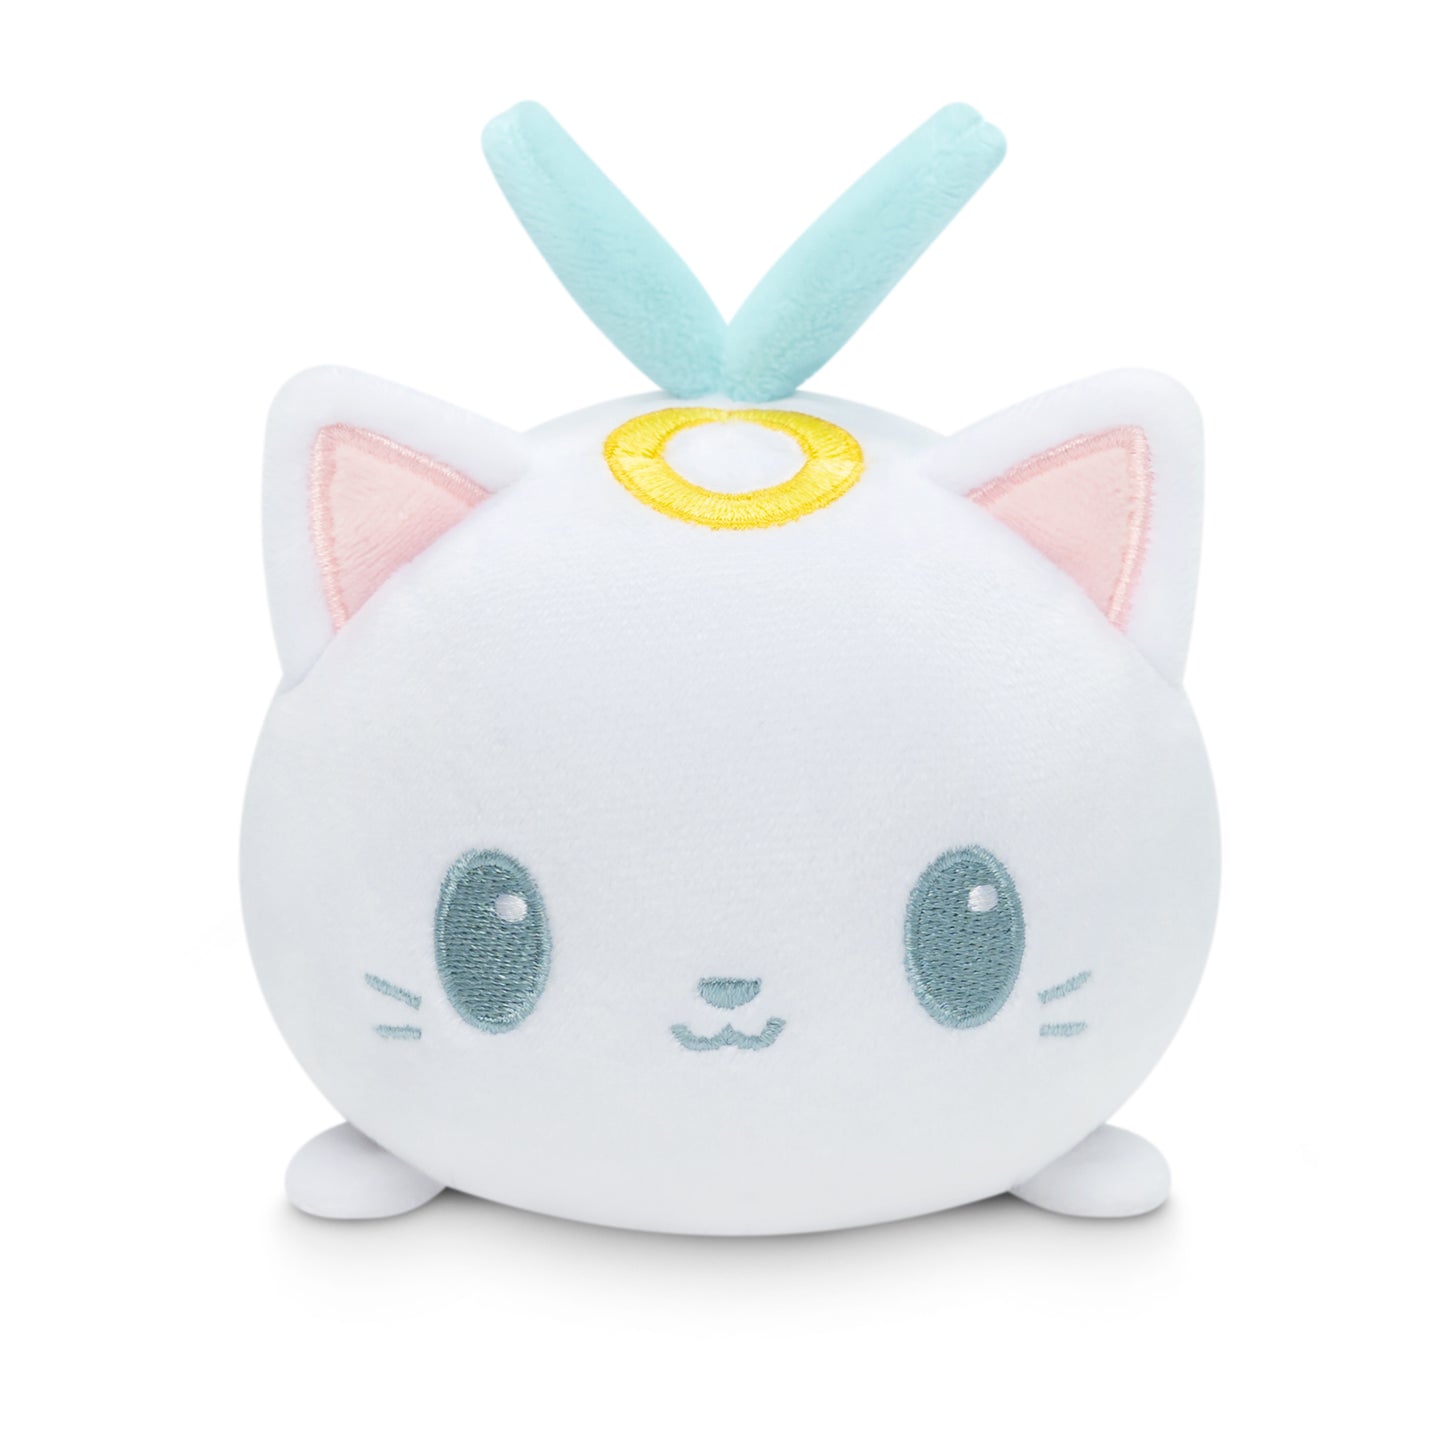 A Plushiverse Angelic Kitty Plushie Tote Bag with blue eyes, perfect for snuggling or displaying among your collection of TeeTurtle plushies.